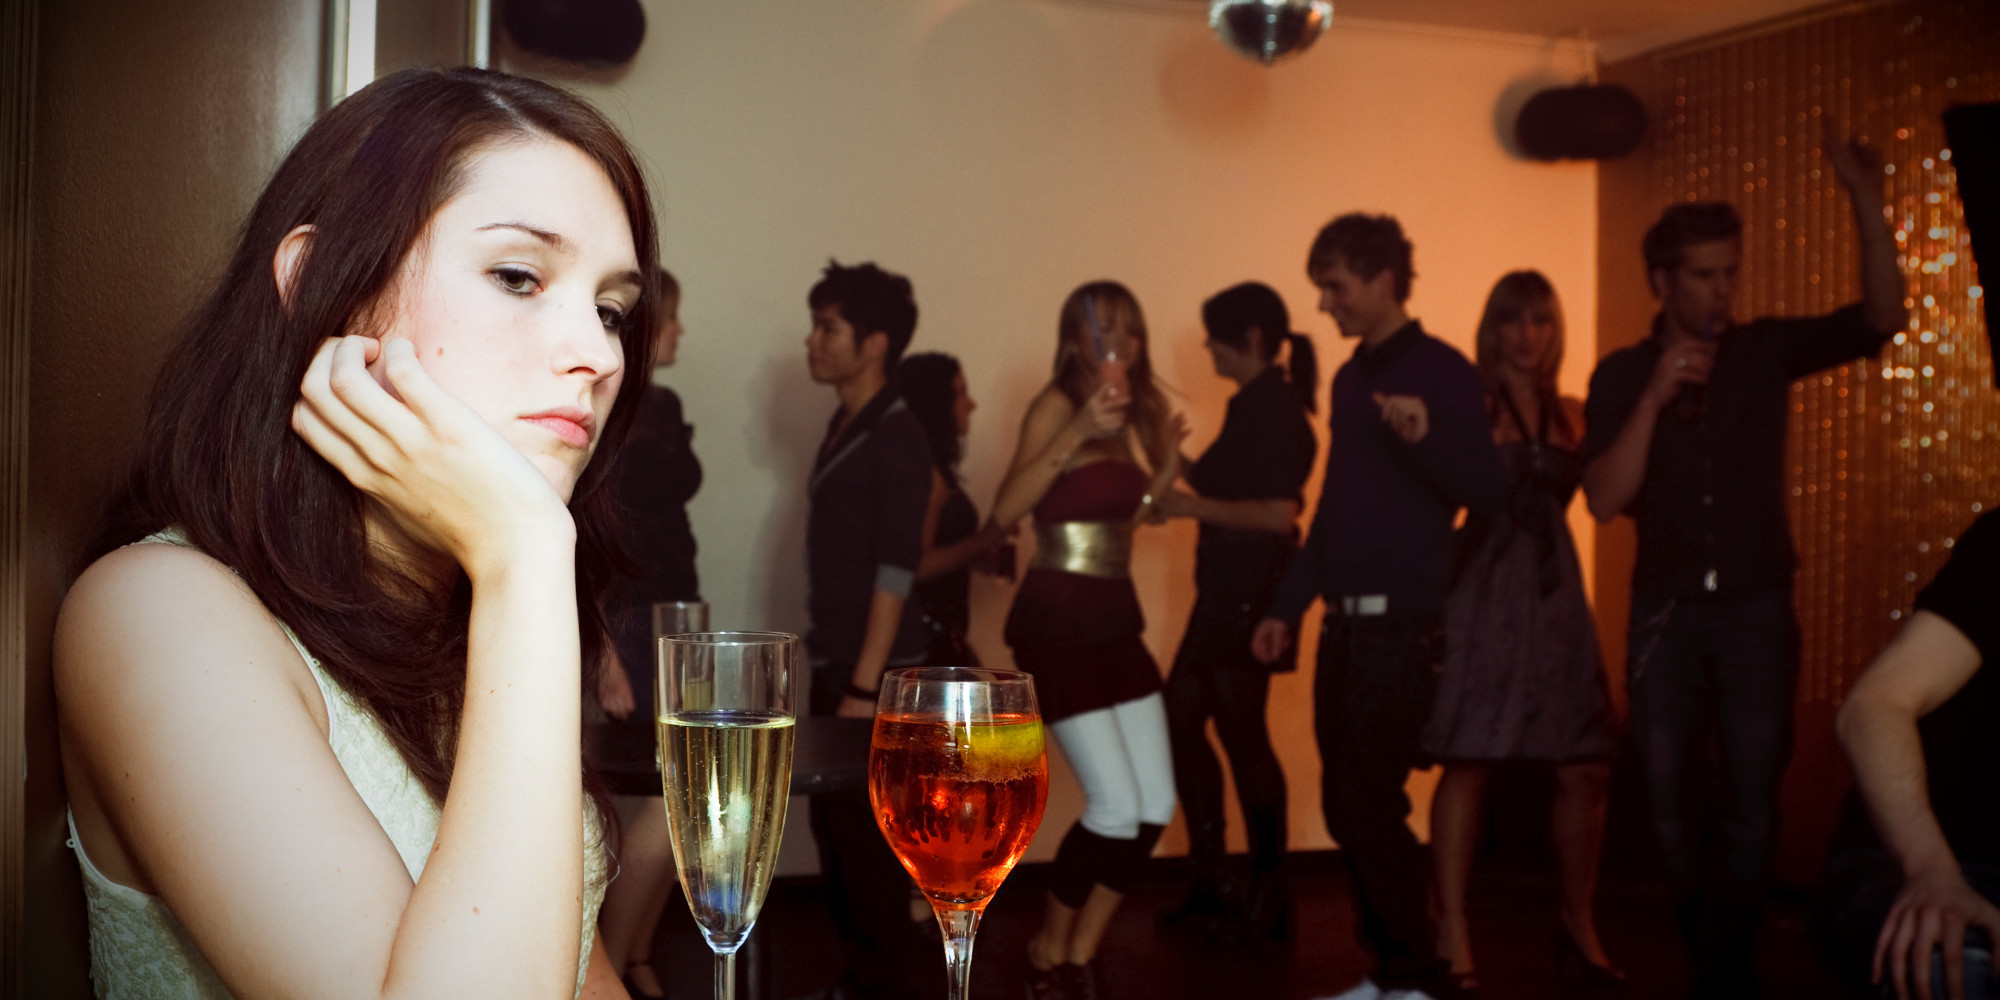 The Survival Guide For Introverts: Parties